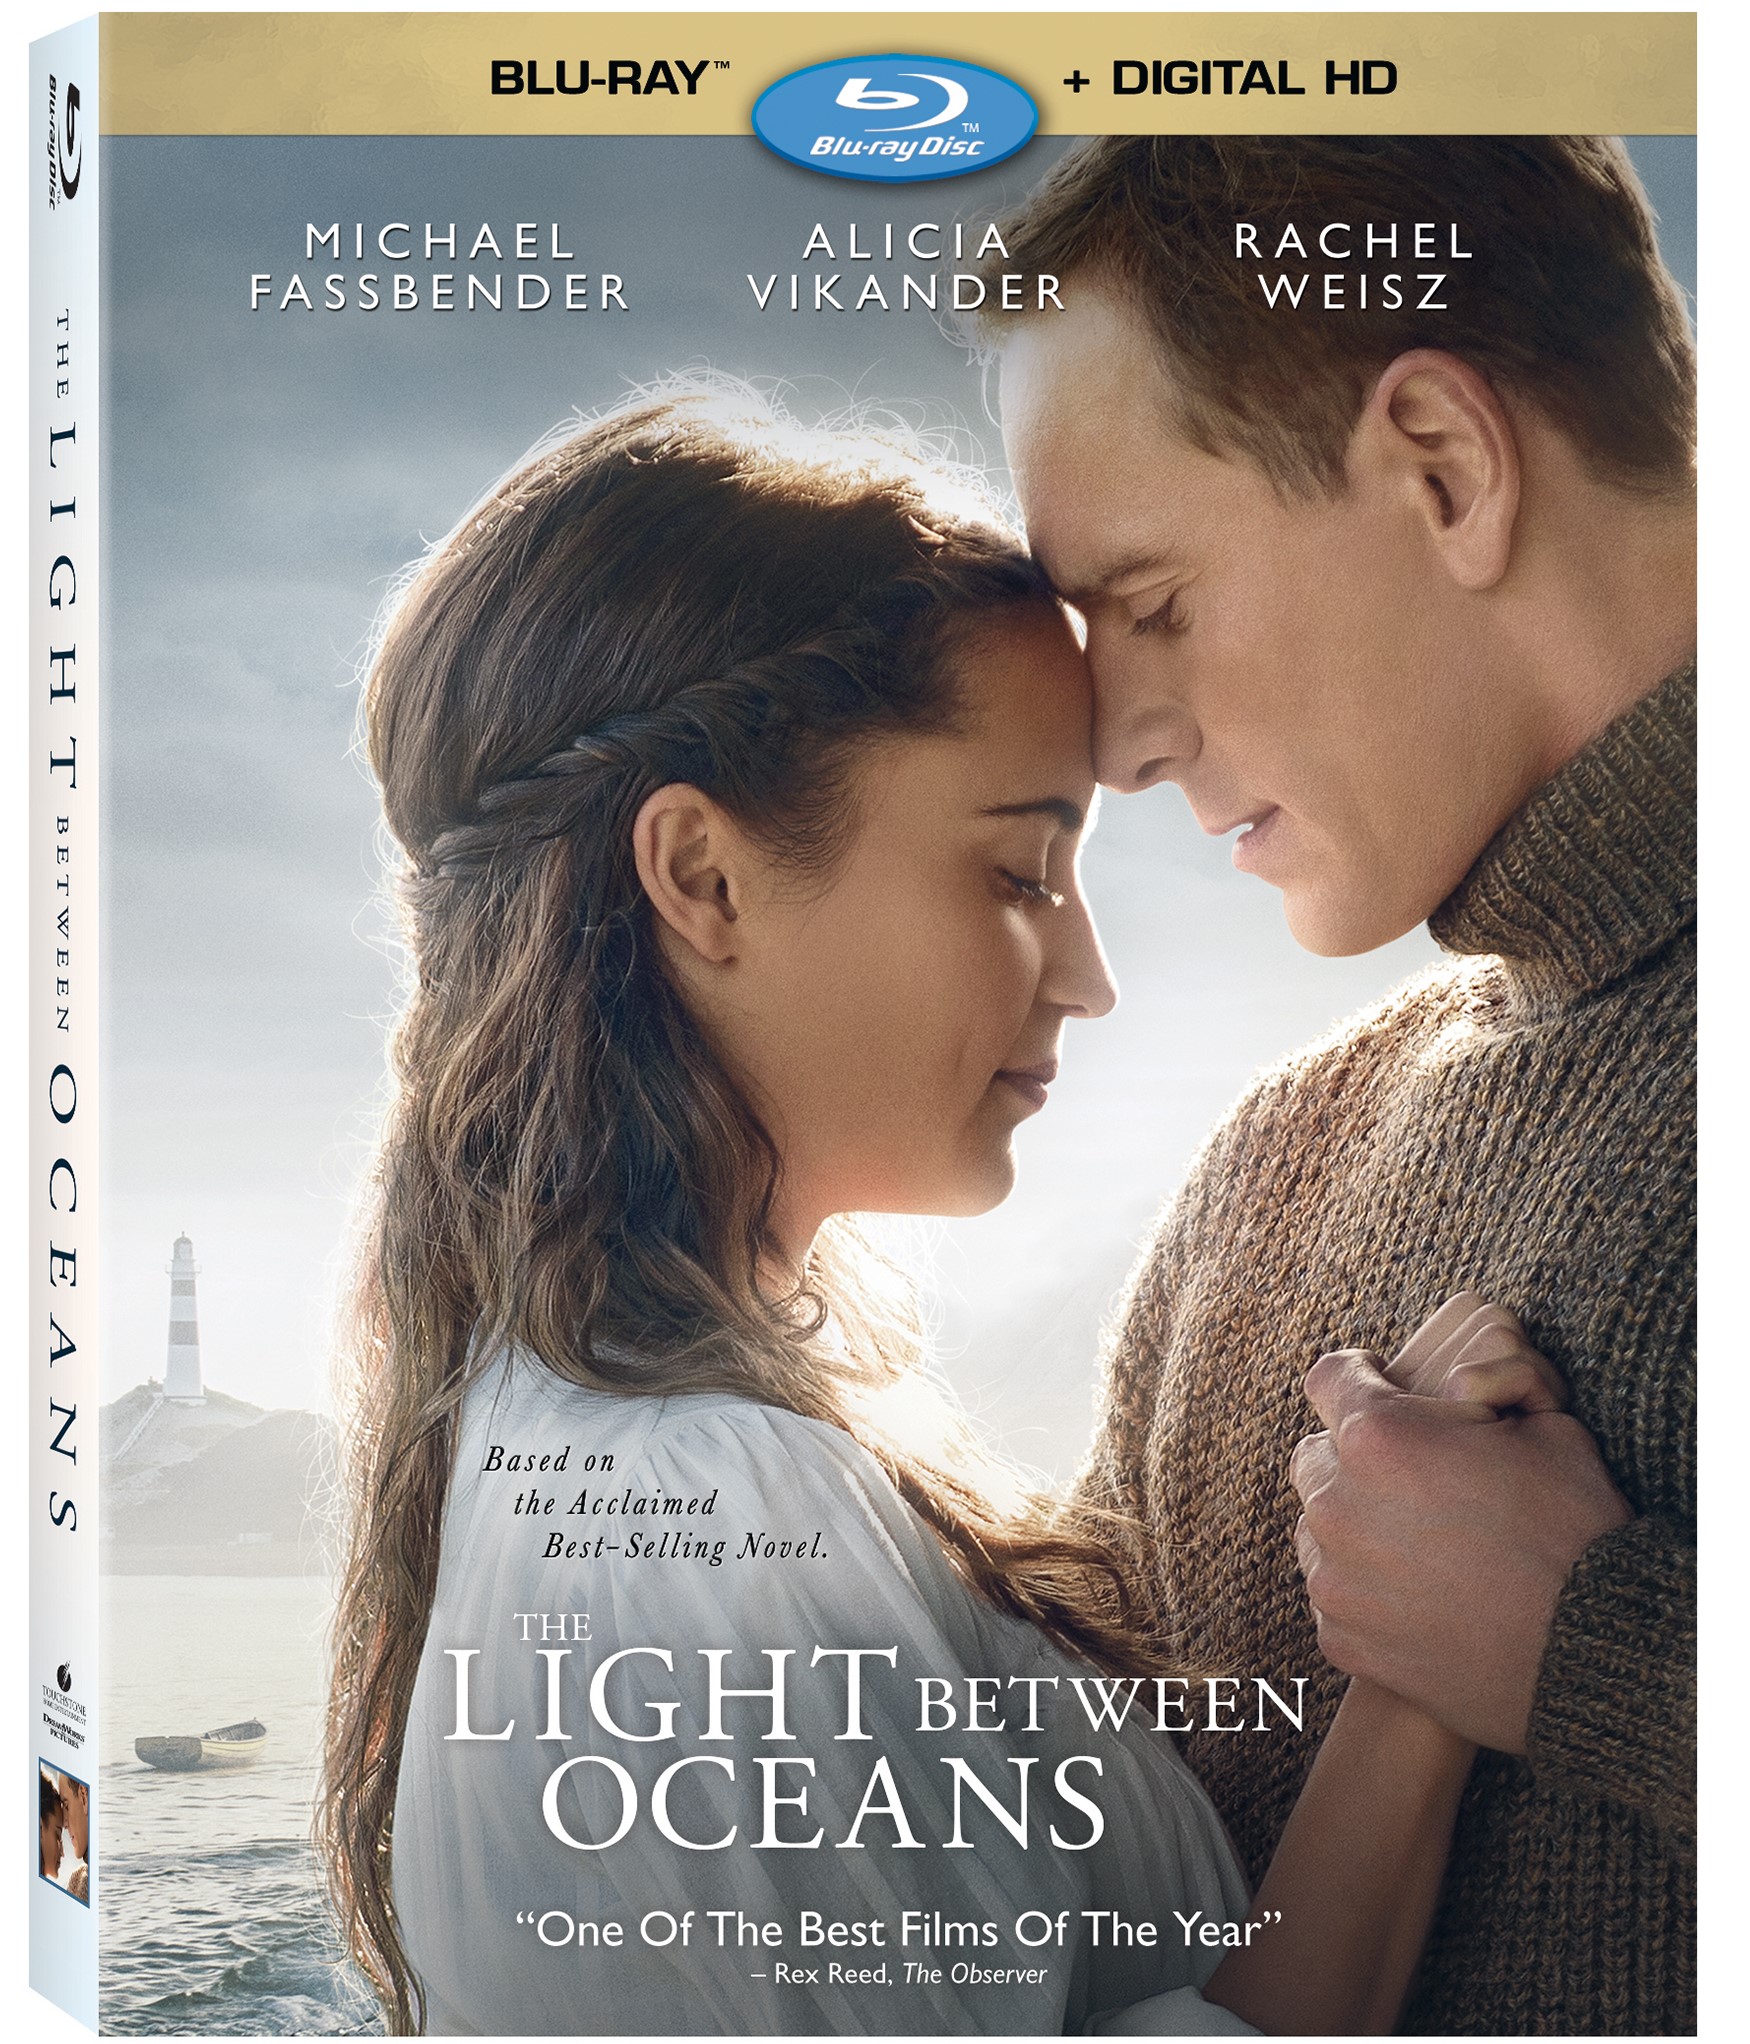 Disney/Dreamworks Pictures’ “The Light Between Oceans” On Digital HD Blu-ray, DVD And On-Demand Jan 24th